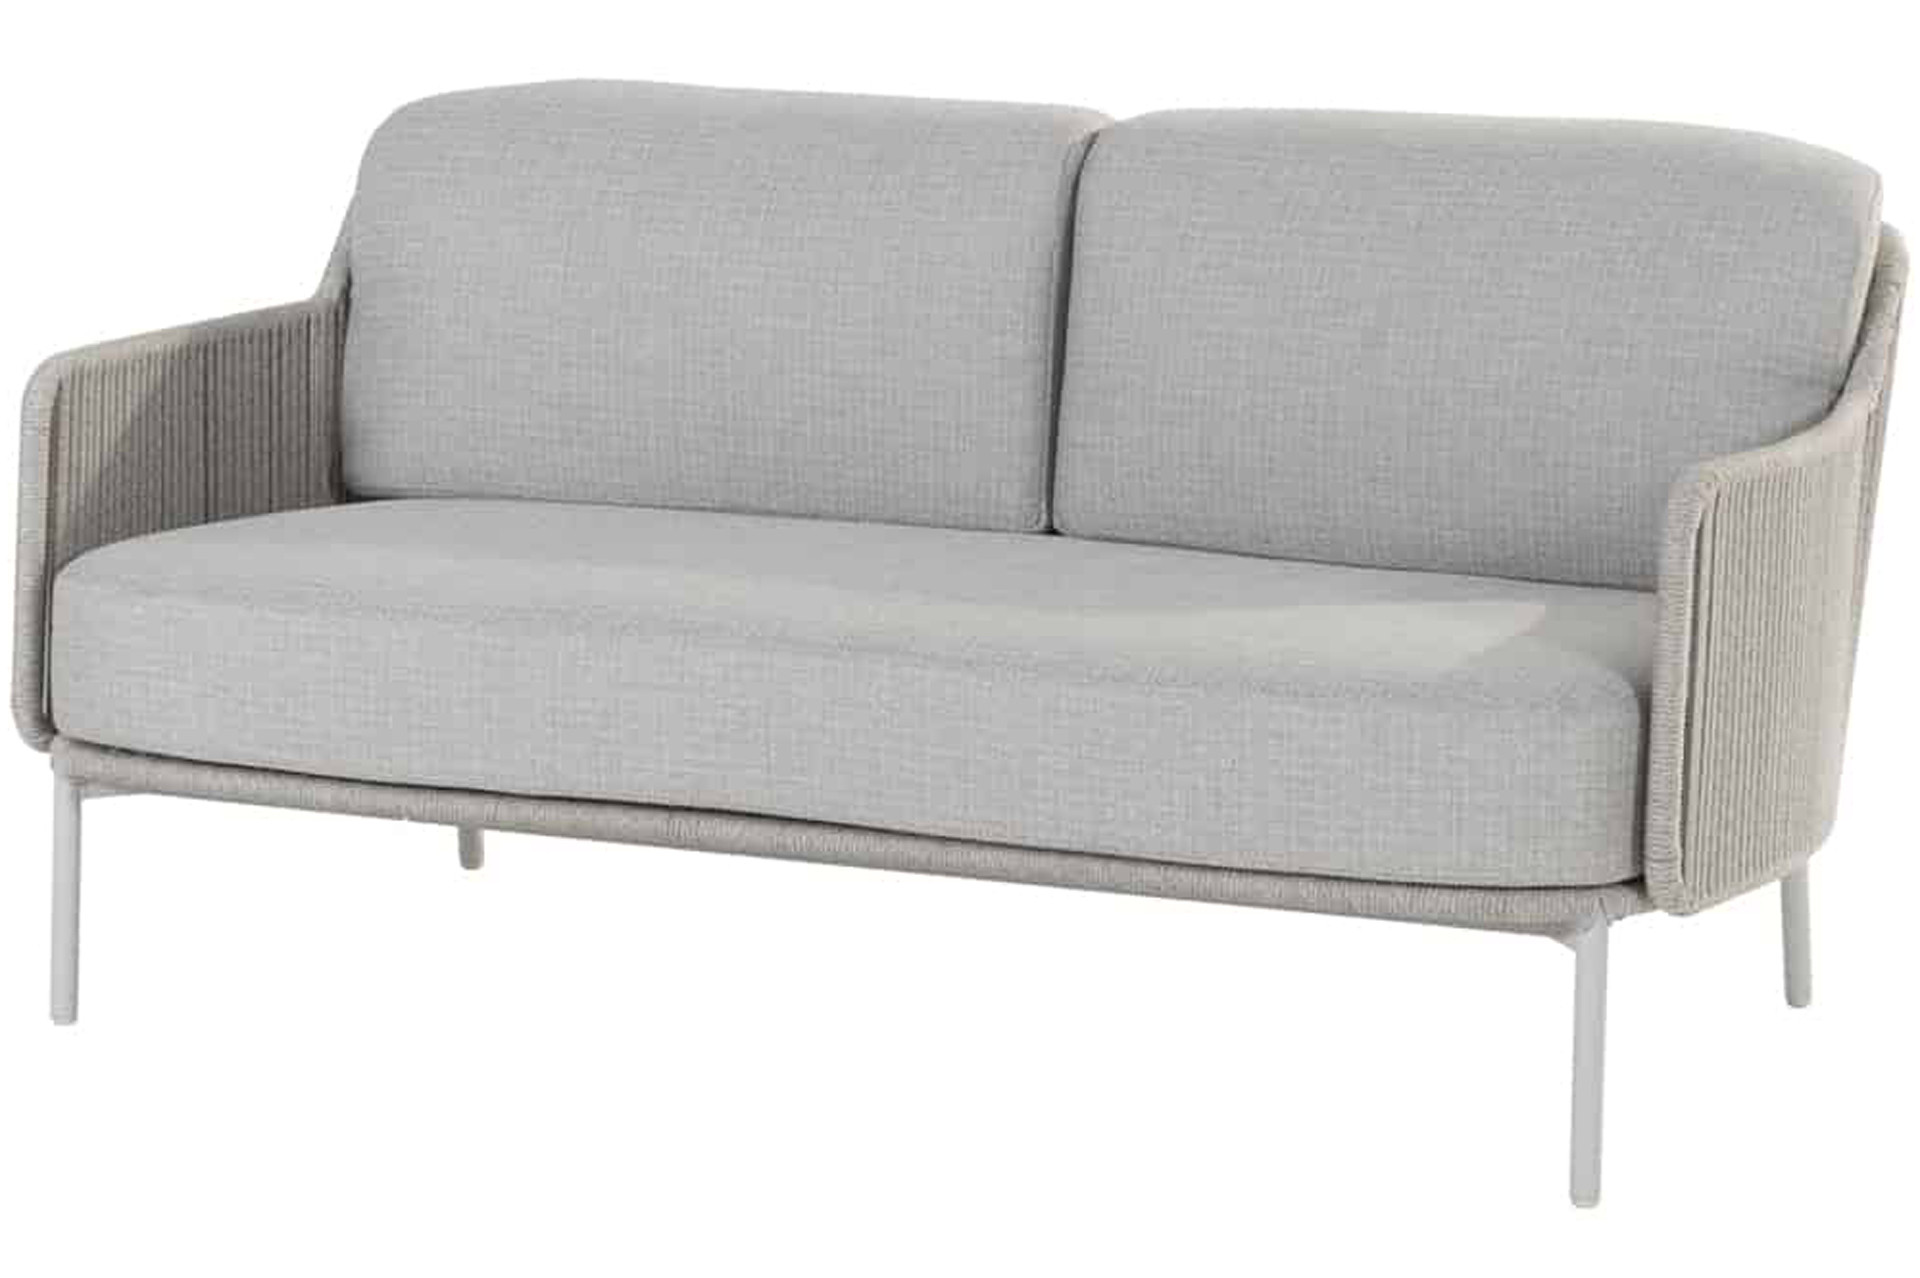 Bernini living bench 2,5 seaters Frozen with 4 cushions